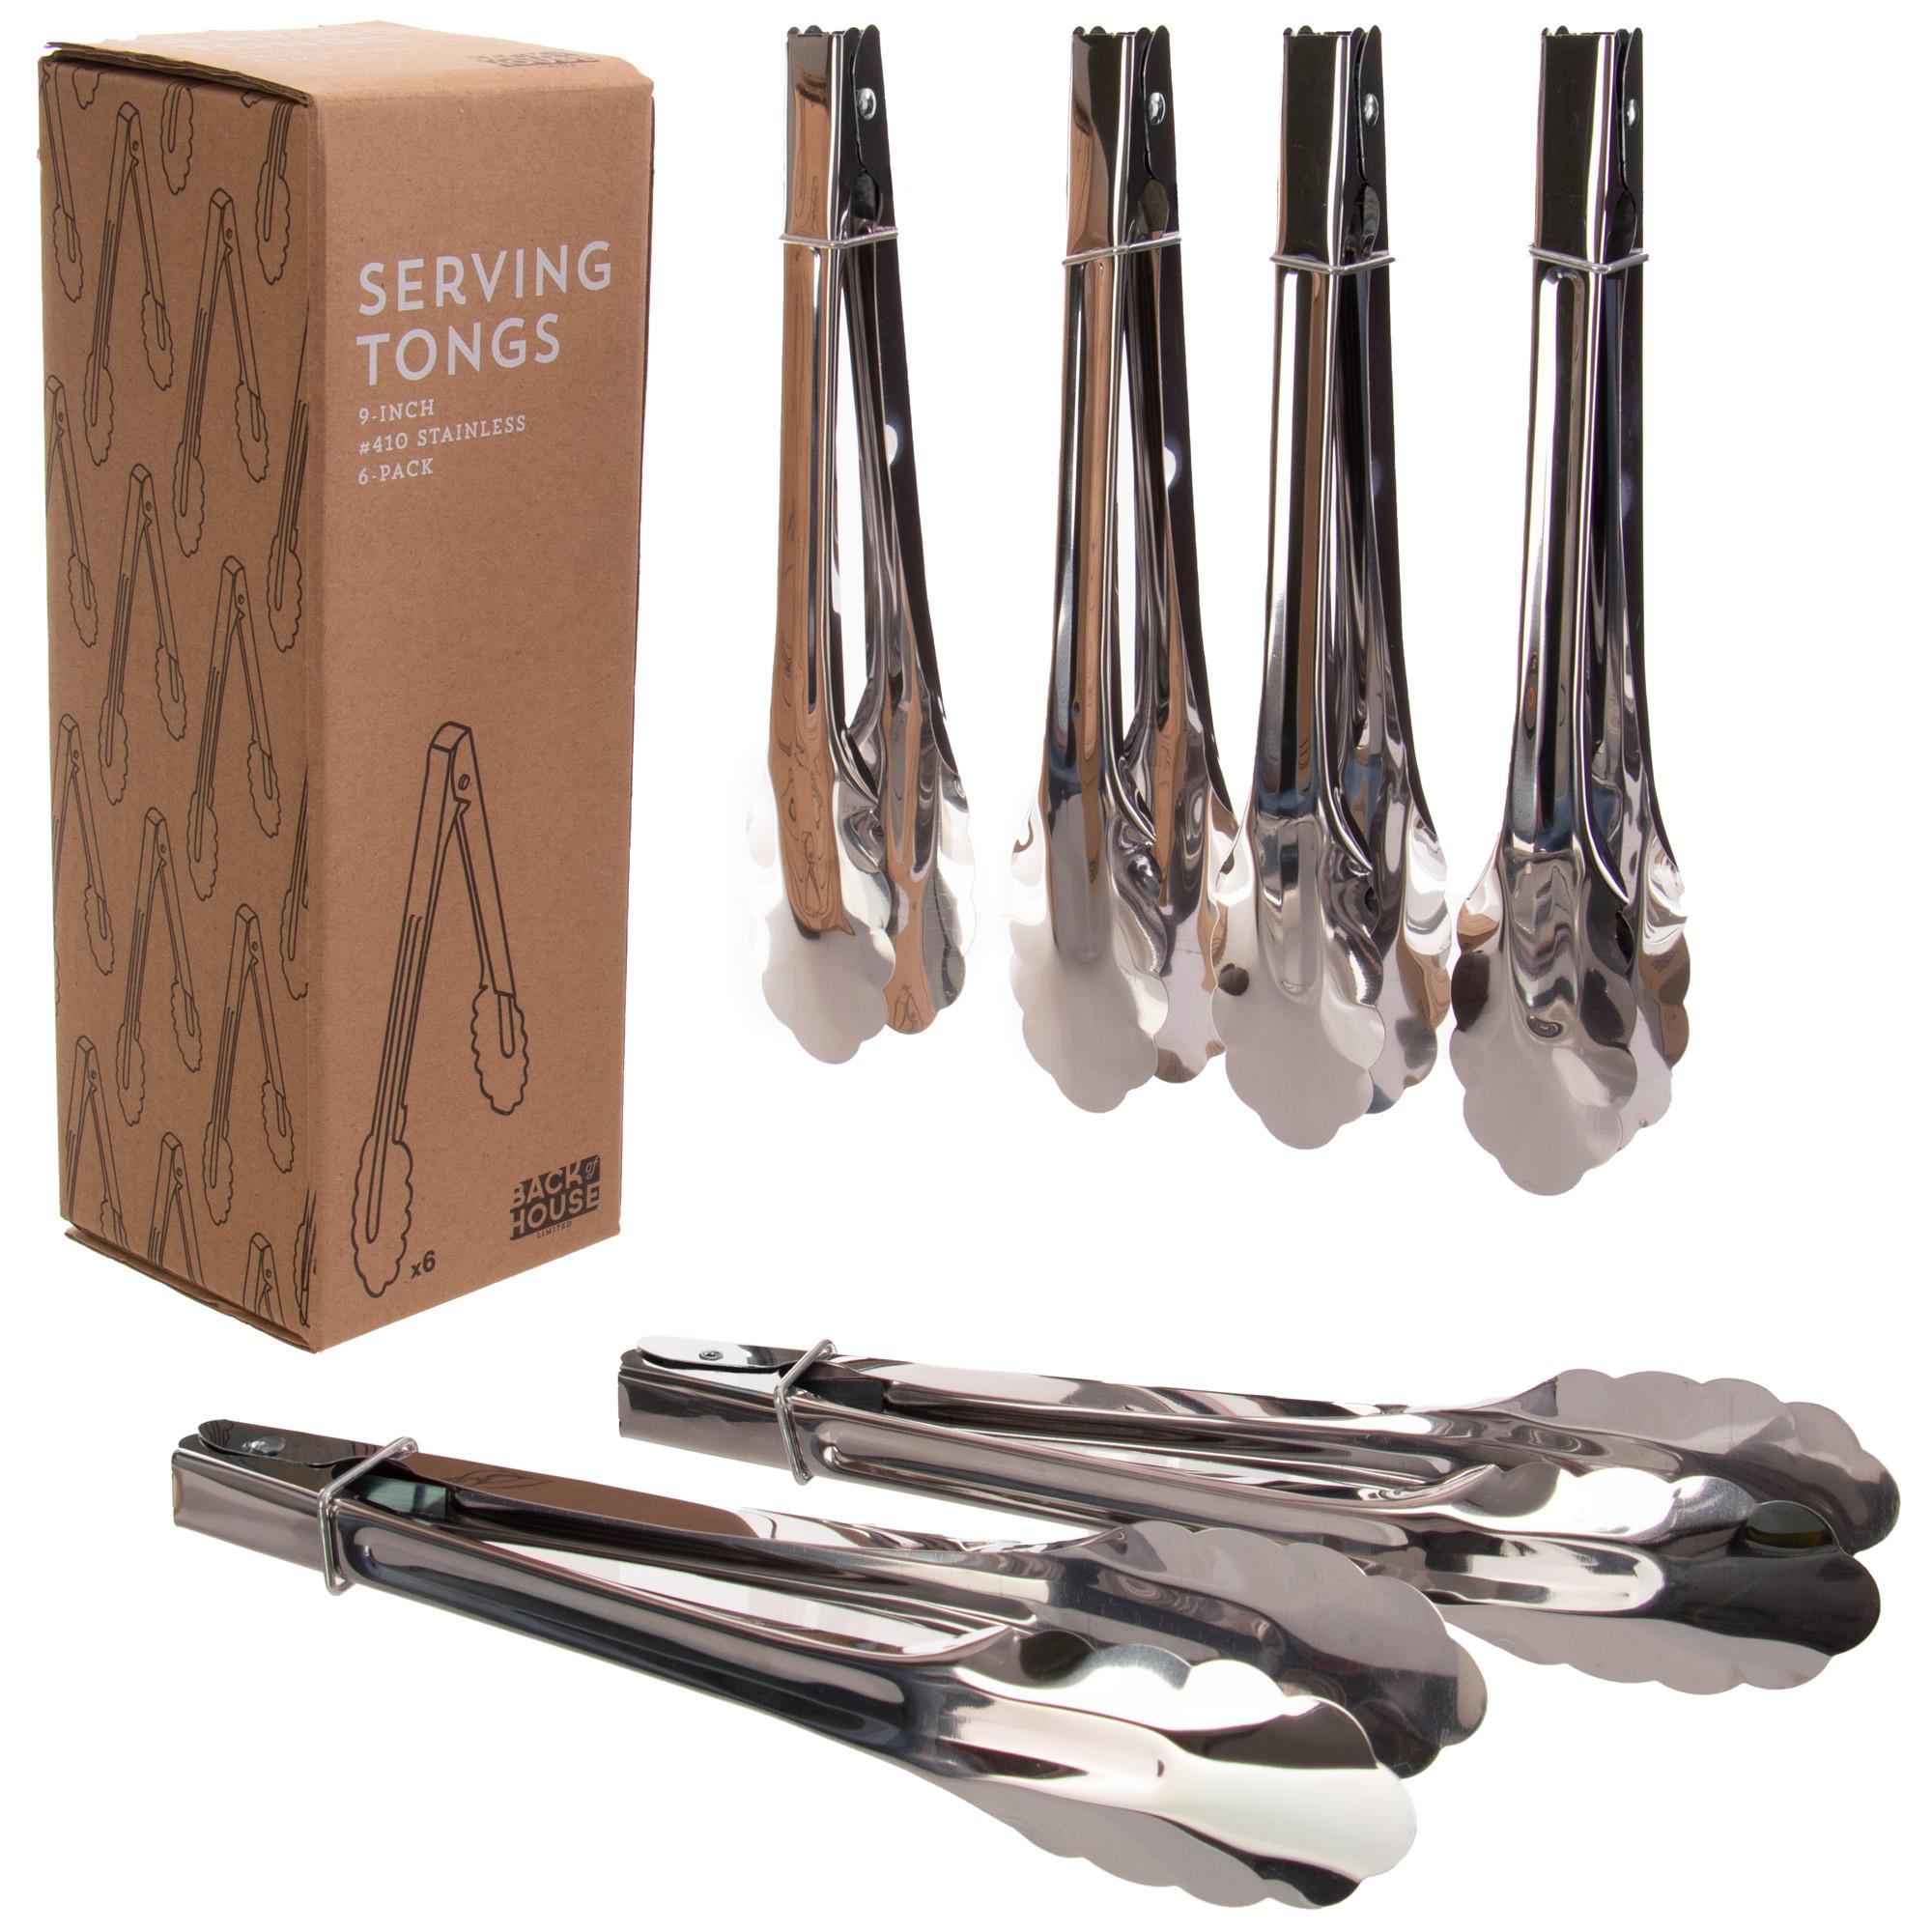 6-pack Stainless Steel Serving Tongs, 9"